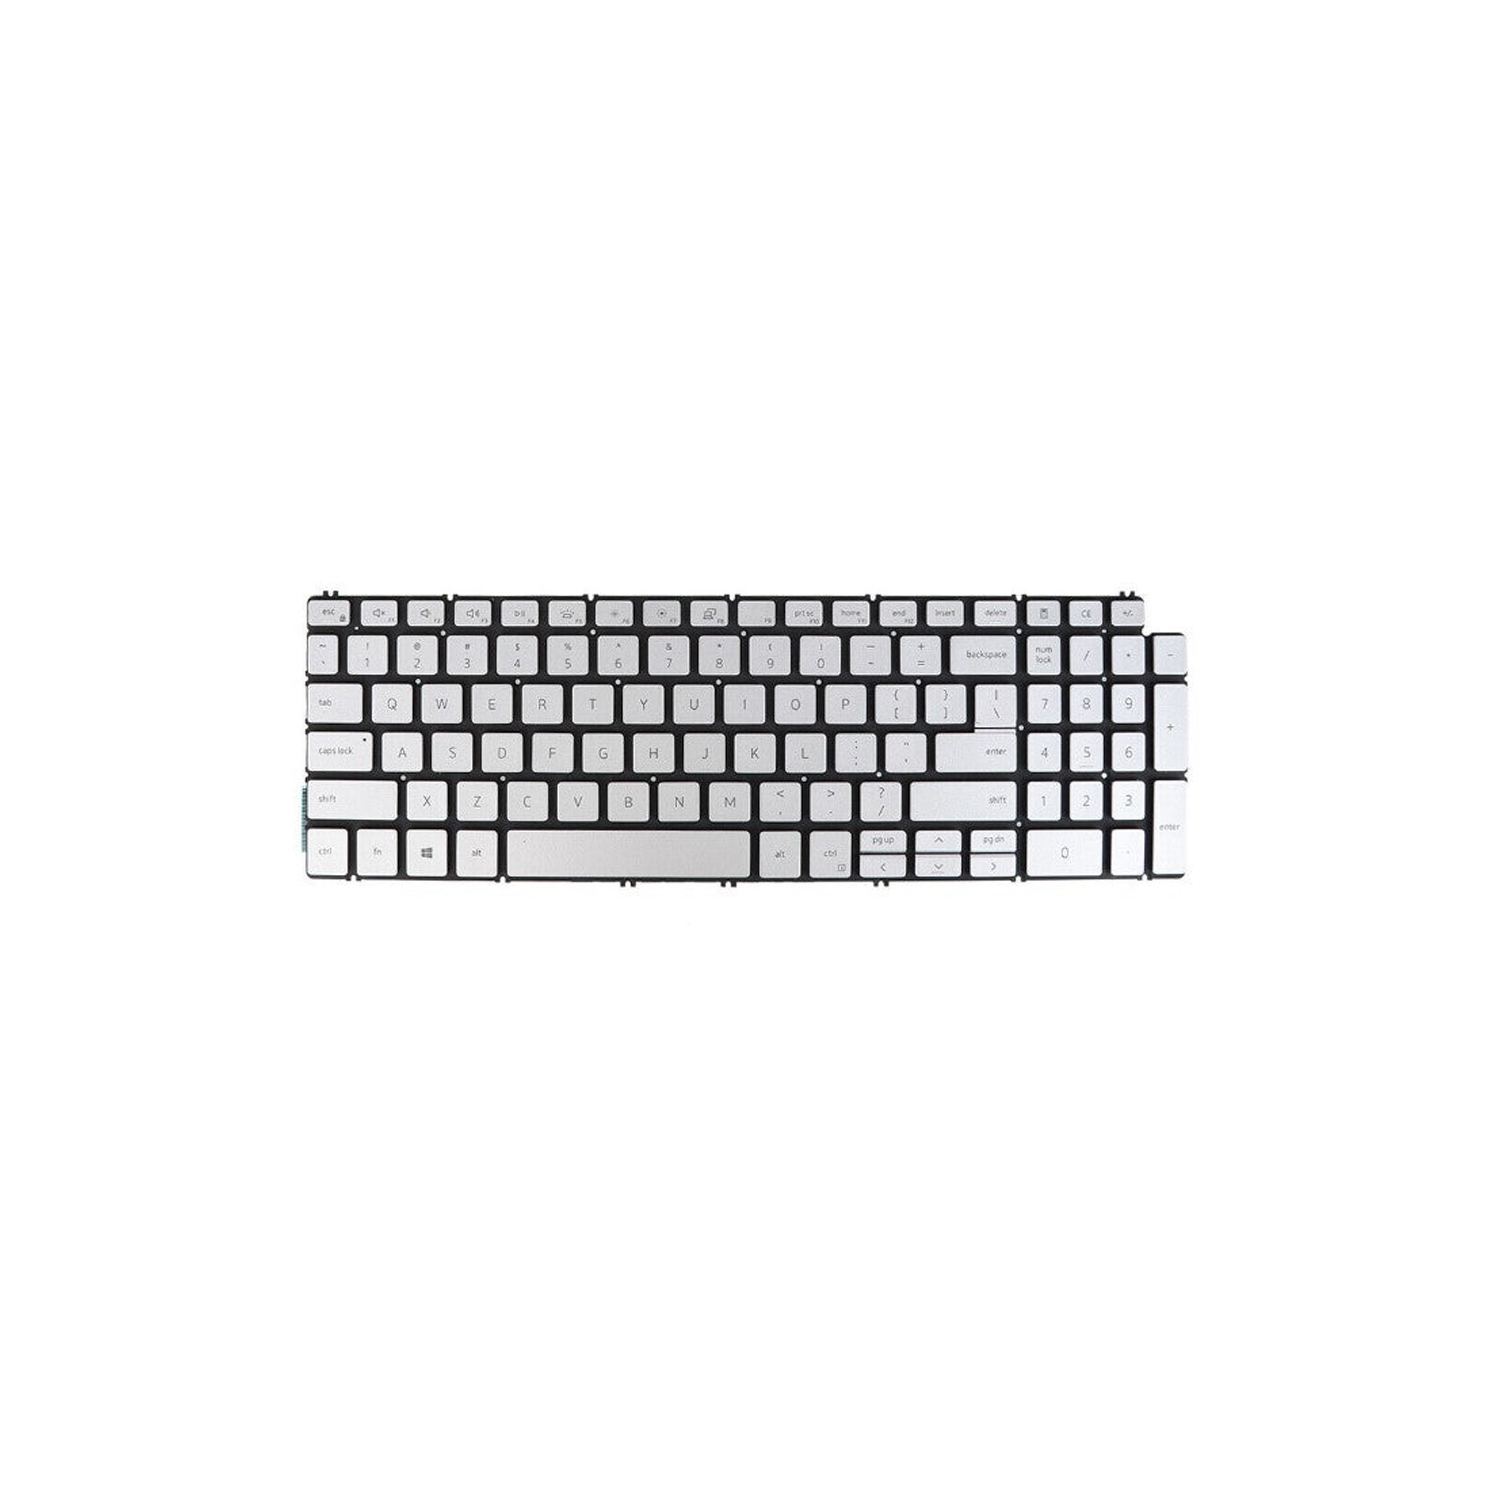 New Dell Inspiron 15 5501 5502 5508 5509 Silver Backlit US English Keyboard